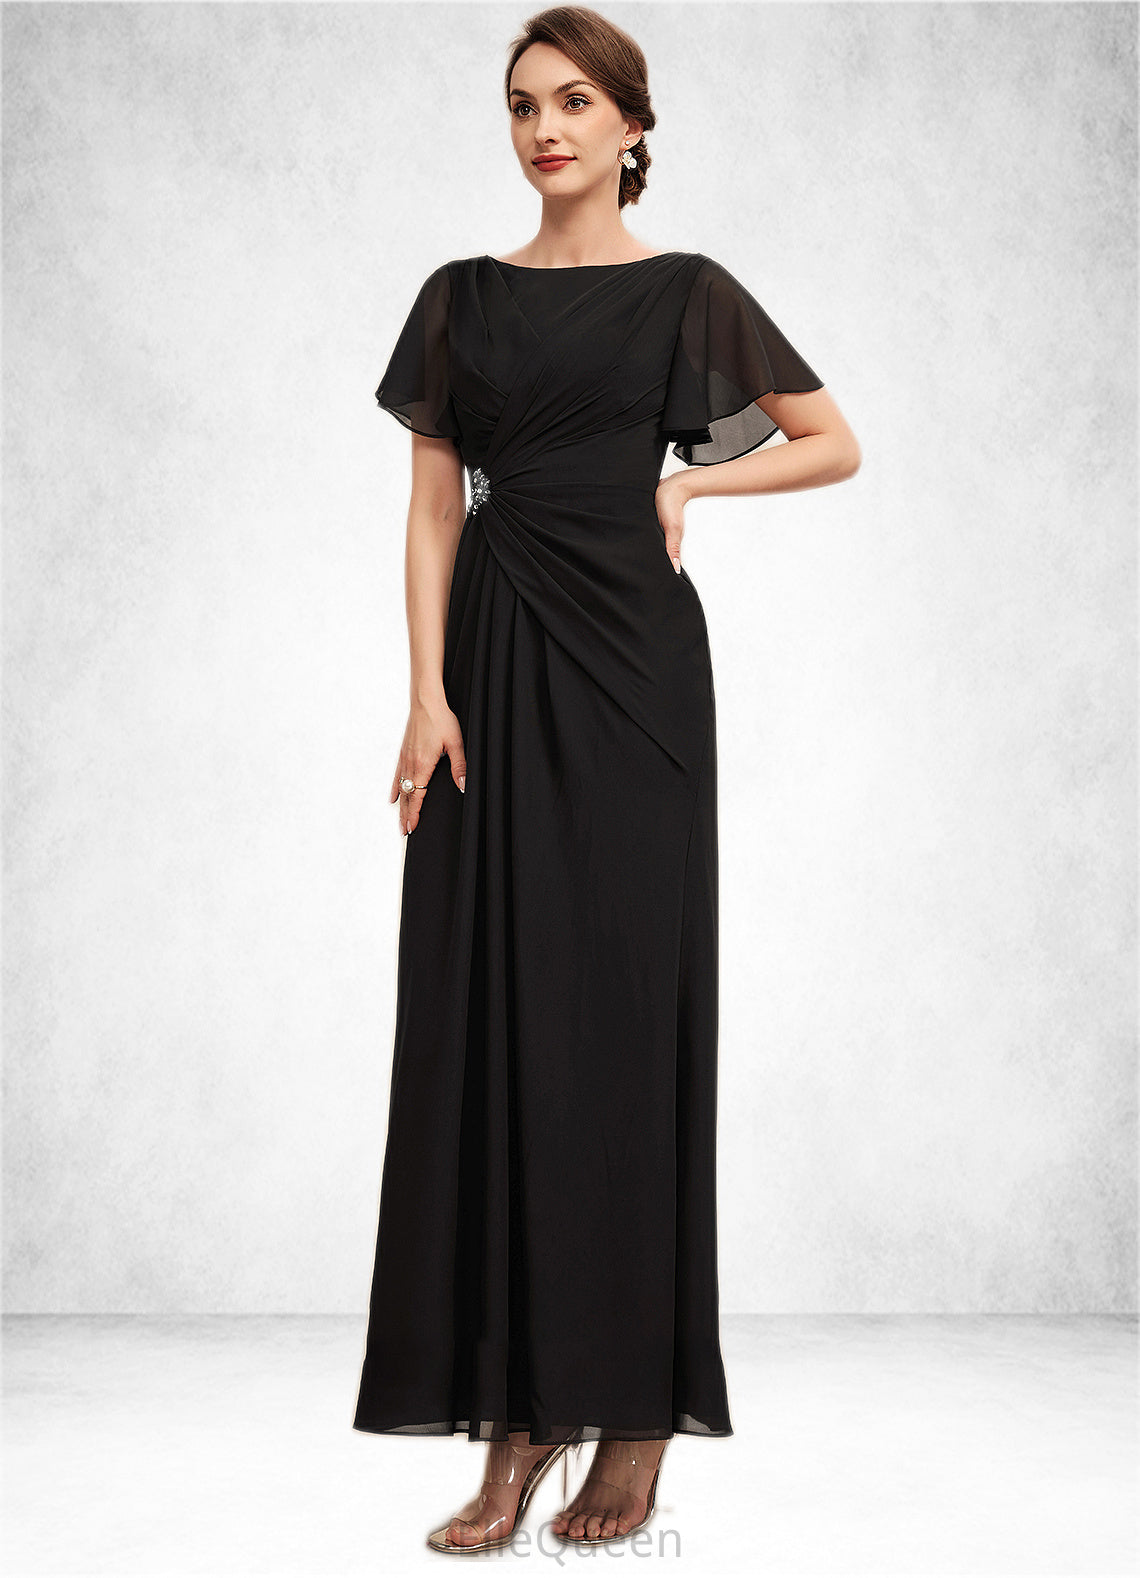 Bella A-Line Scoop Neck Ankle-Length Chiffon Mother of the Bride Dress With Ruffle Beading DG126P0014533